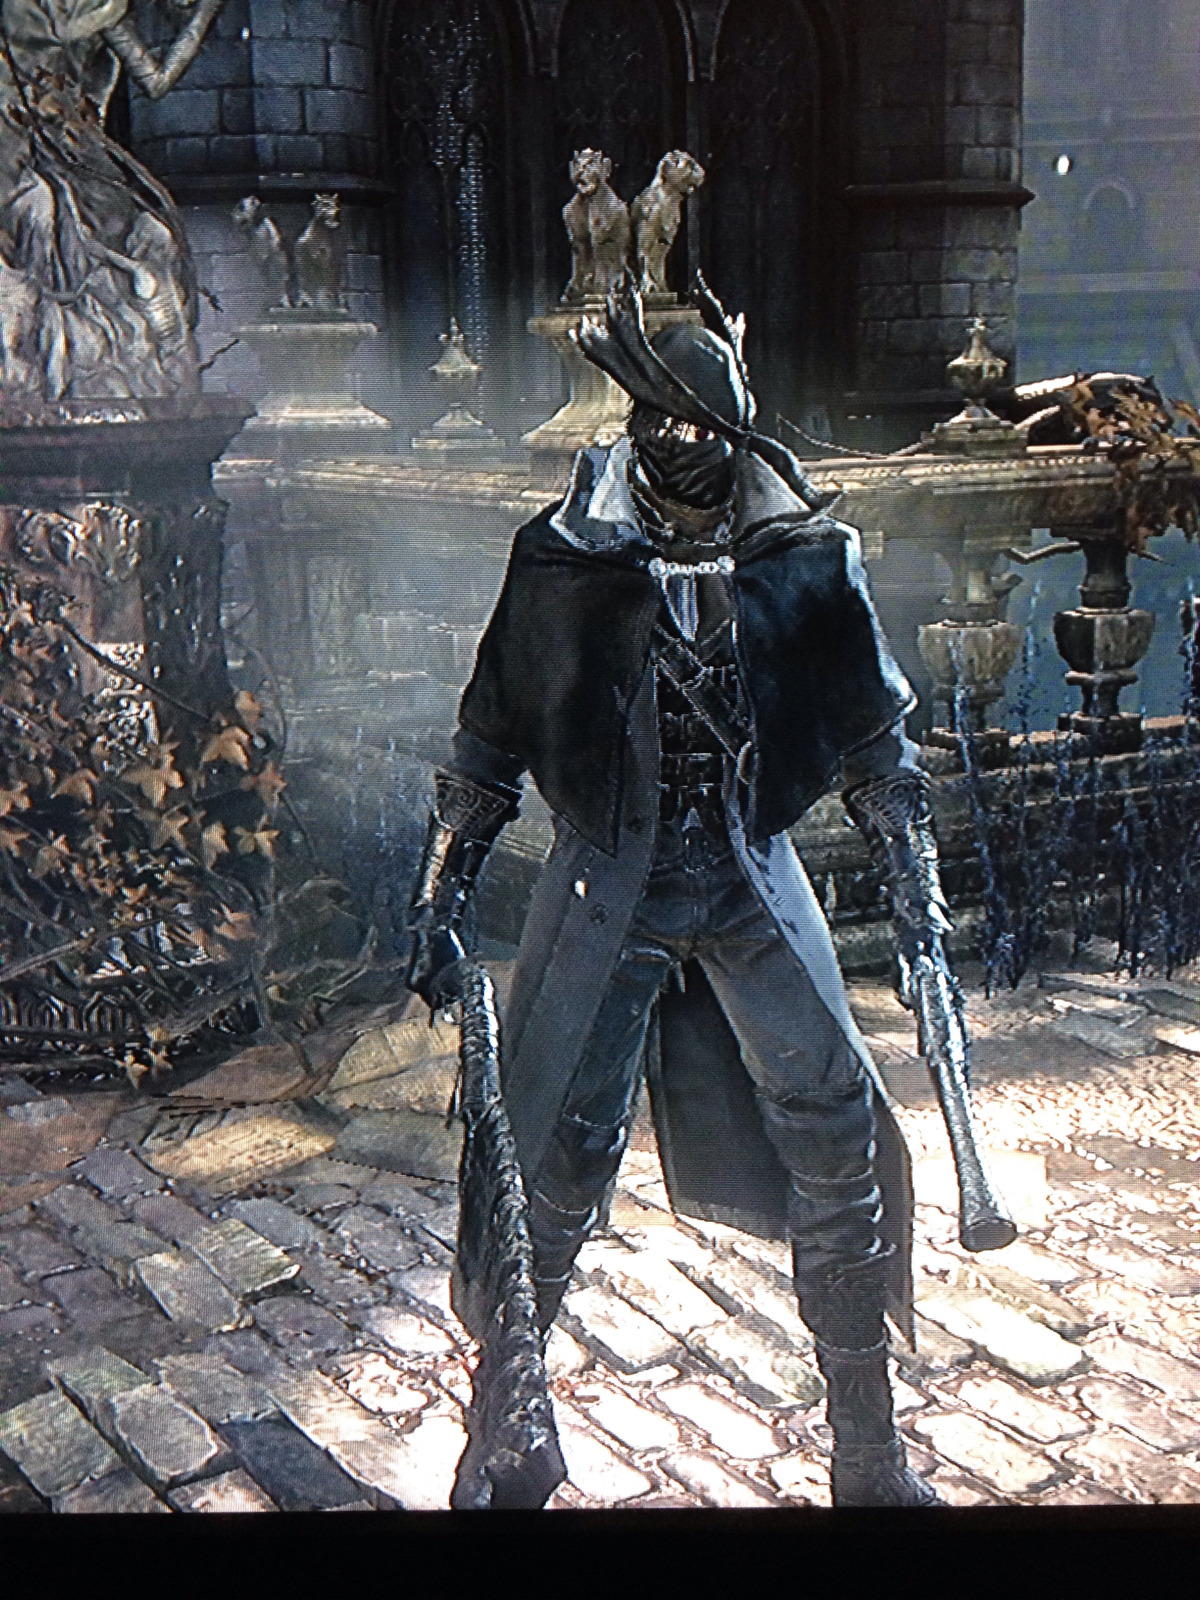 Started playing Bloodborne today and my god, it&rsquo;s so much fun&hellip;!